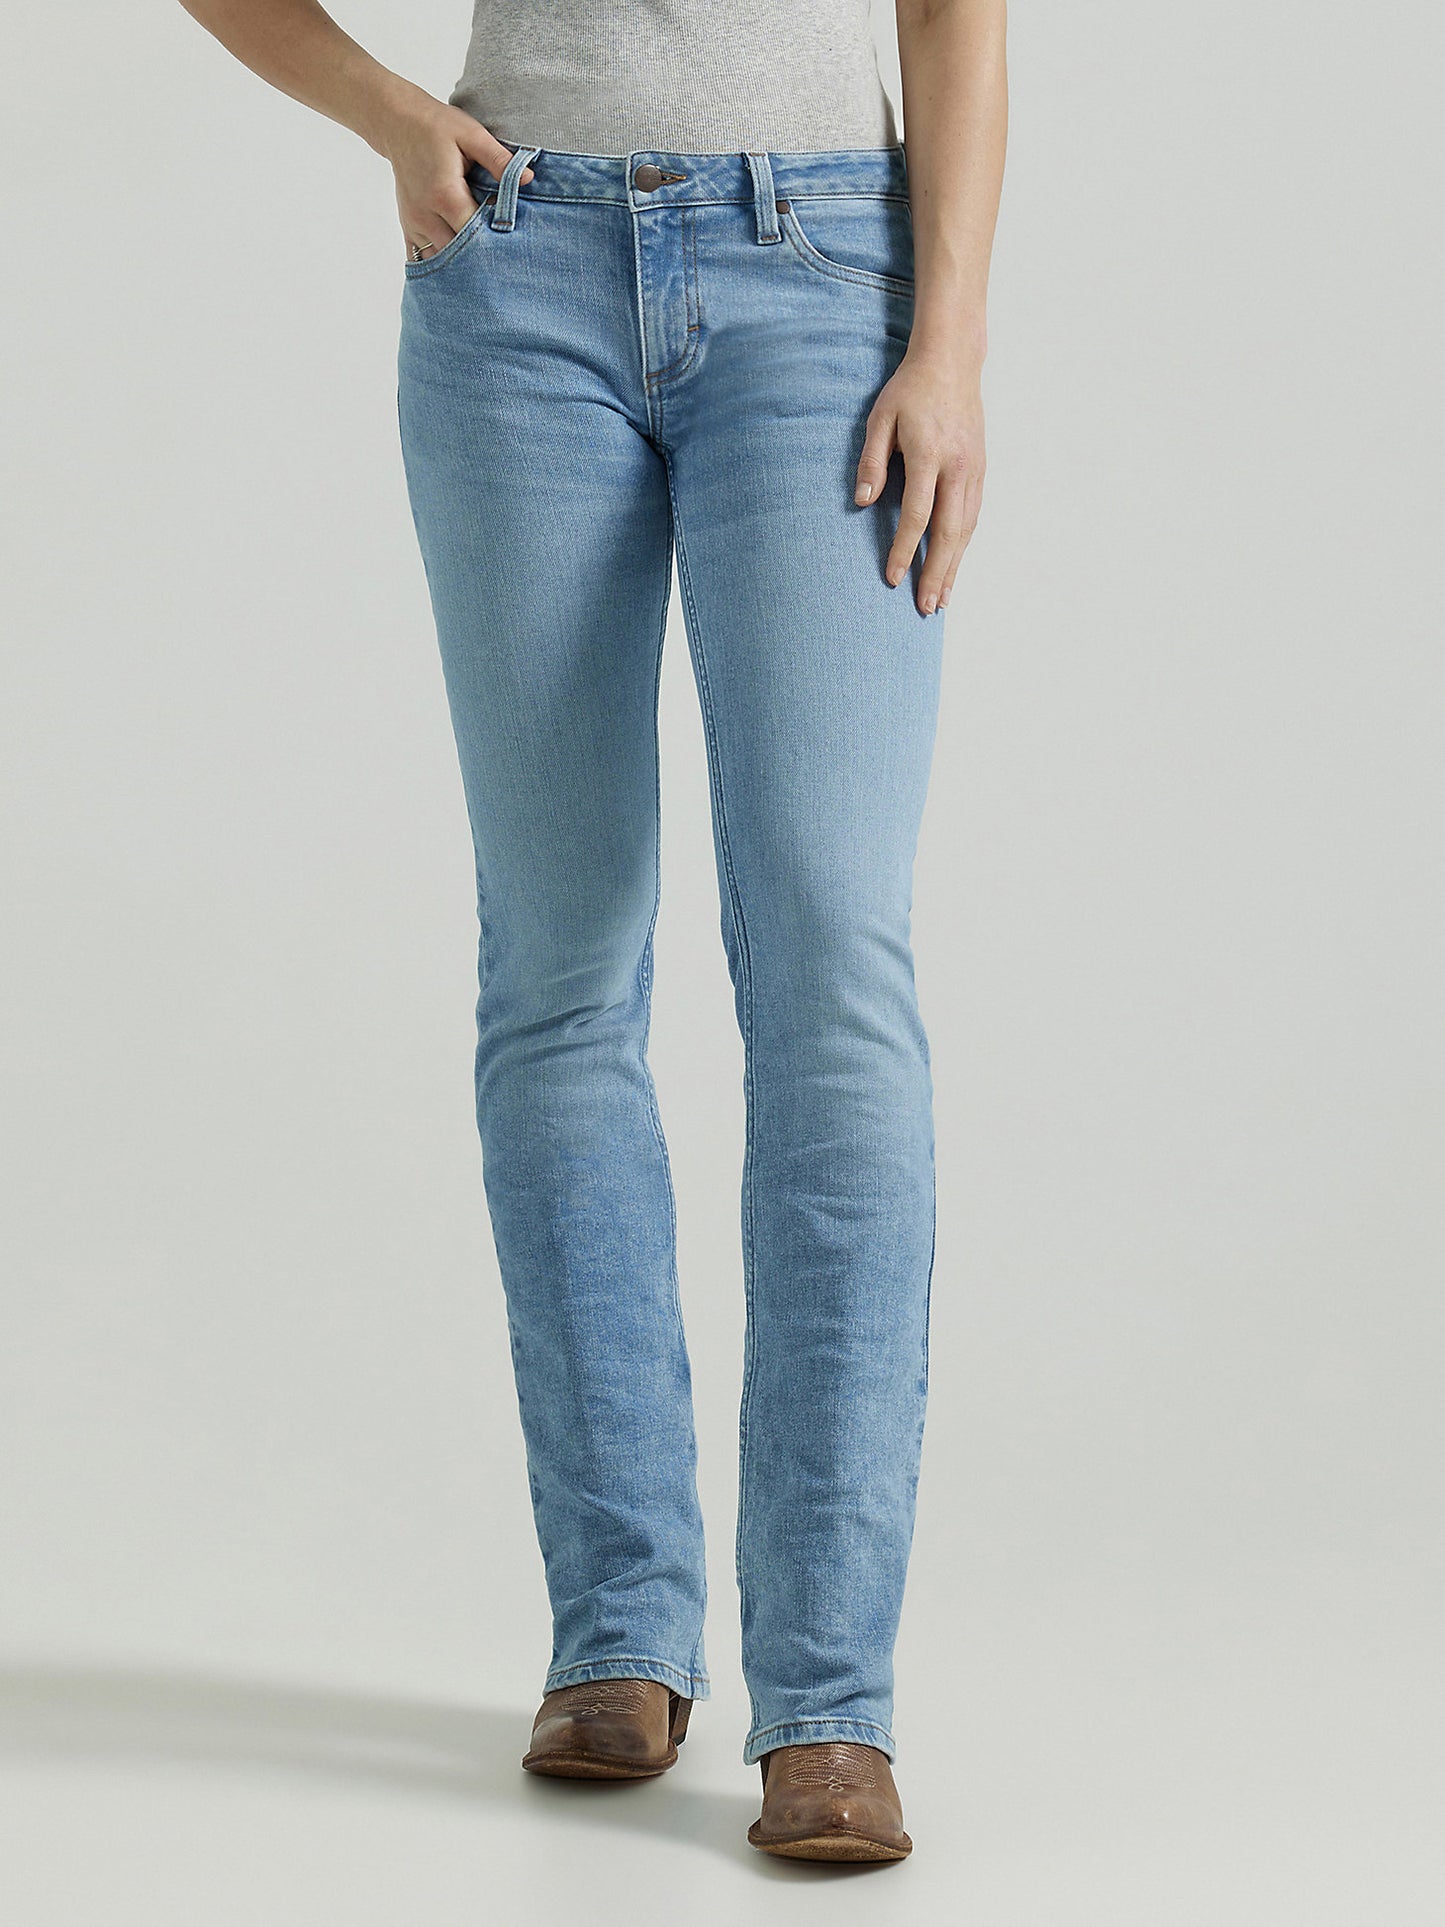 Nellie Bootcut Women's Mid Rise Jeans